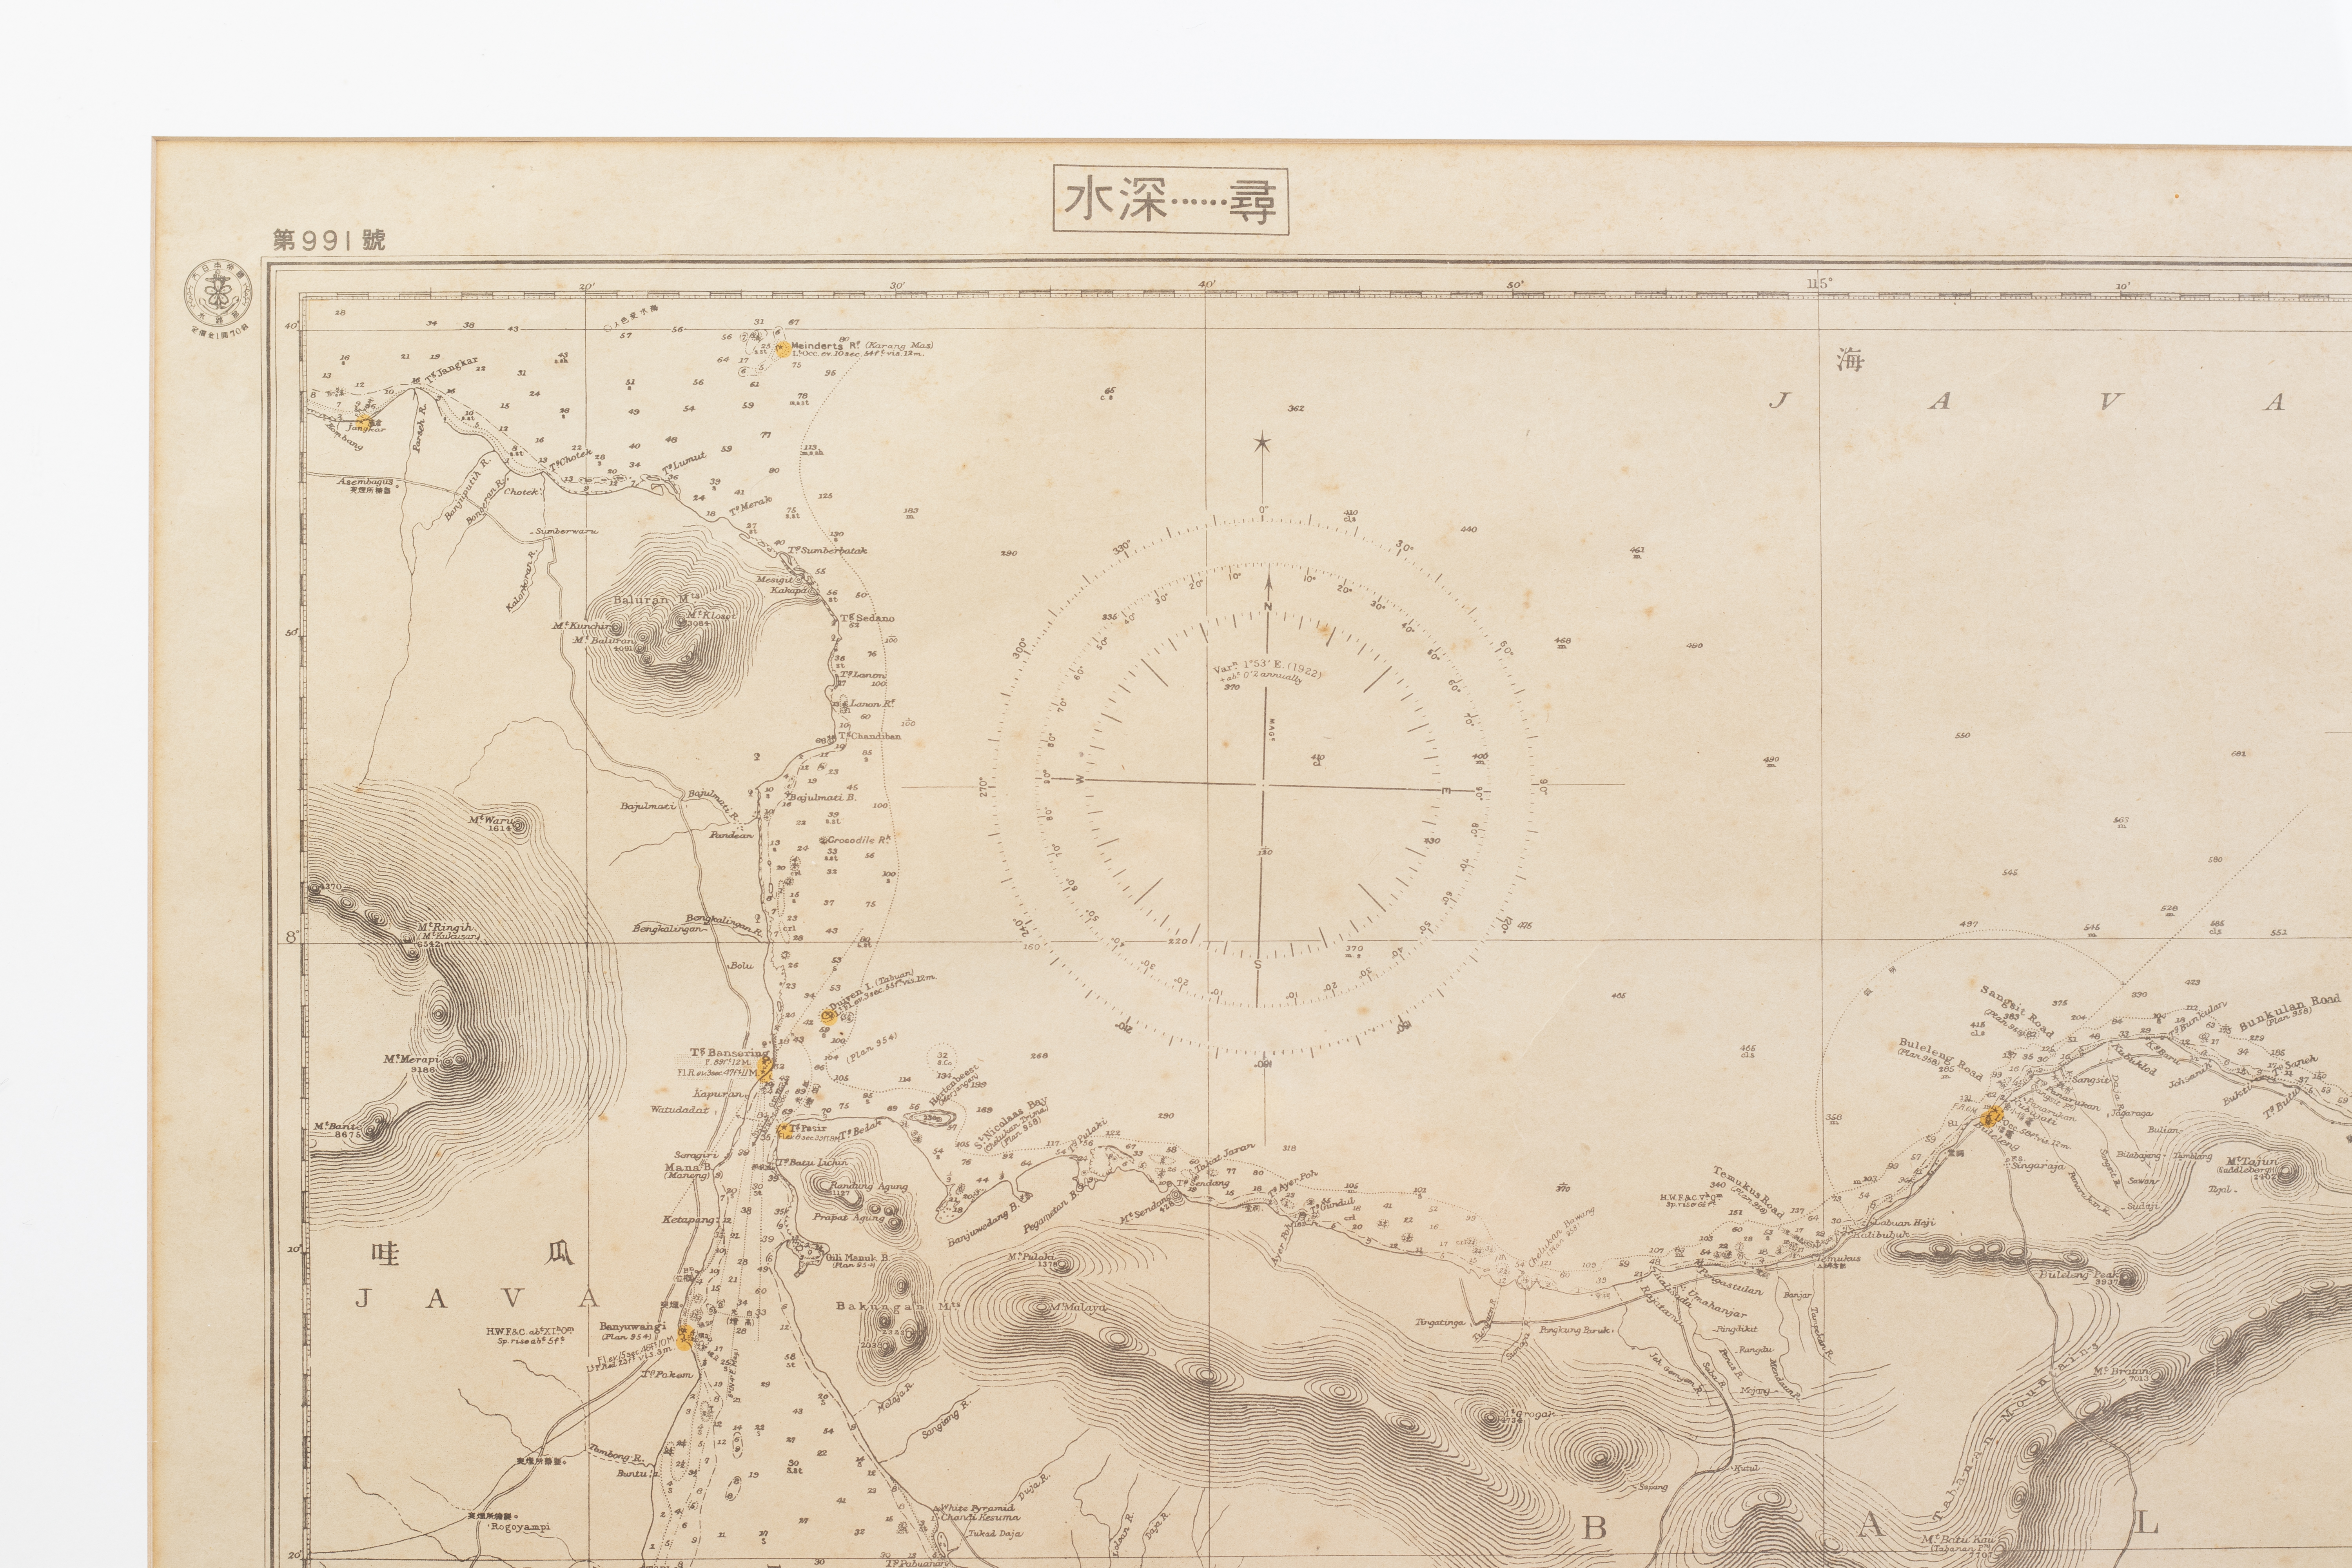 A JAPANESE WARTIME NAUTICAL CHART OF BALI - Image 4 of 6